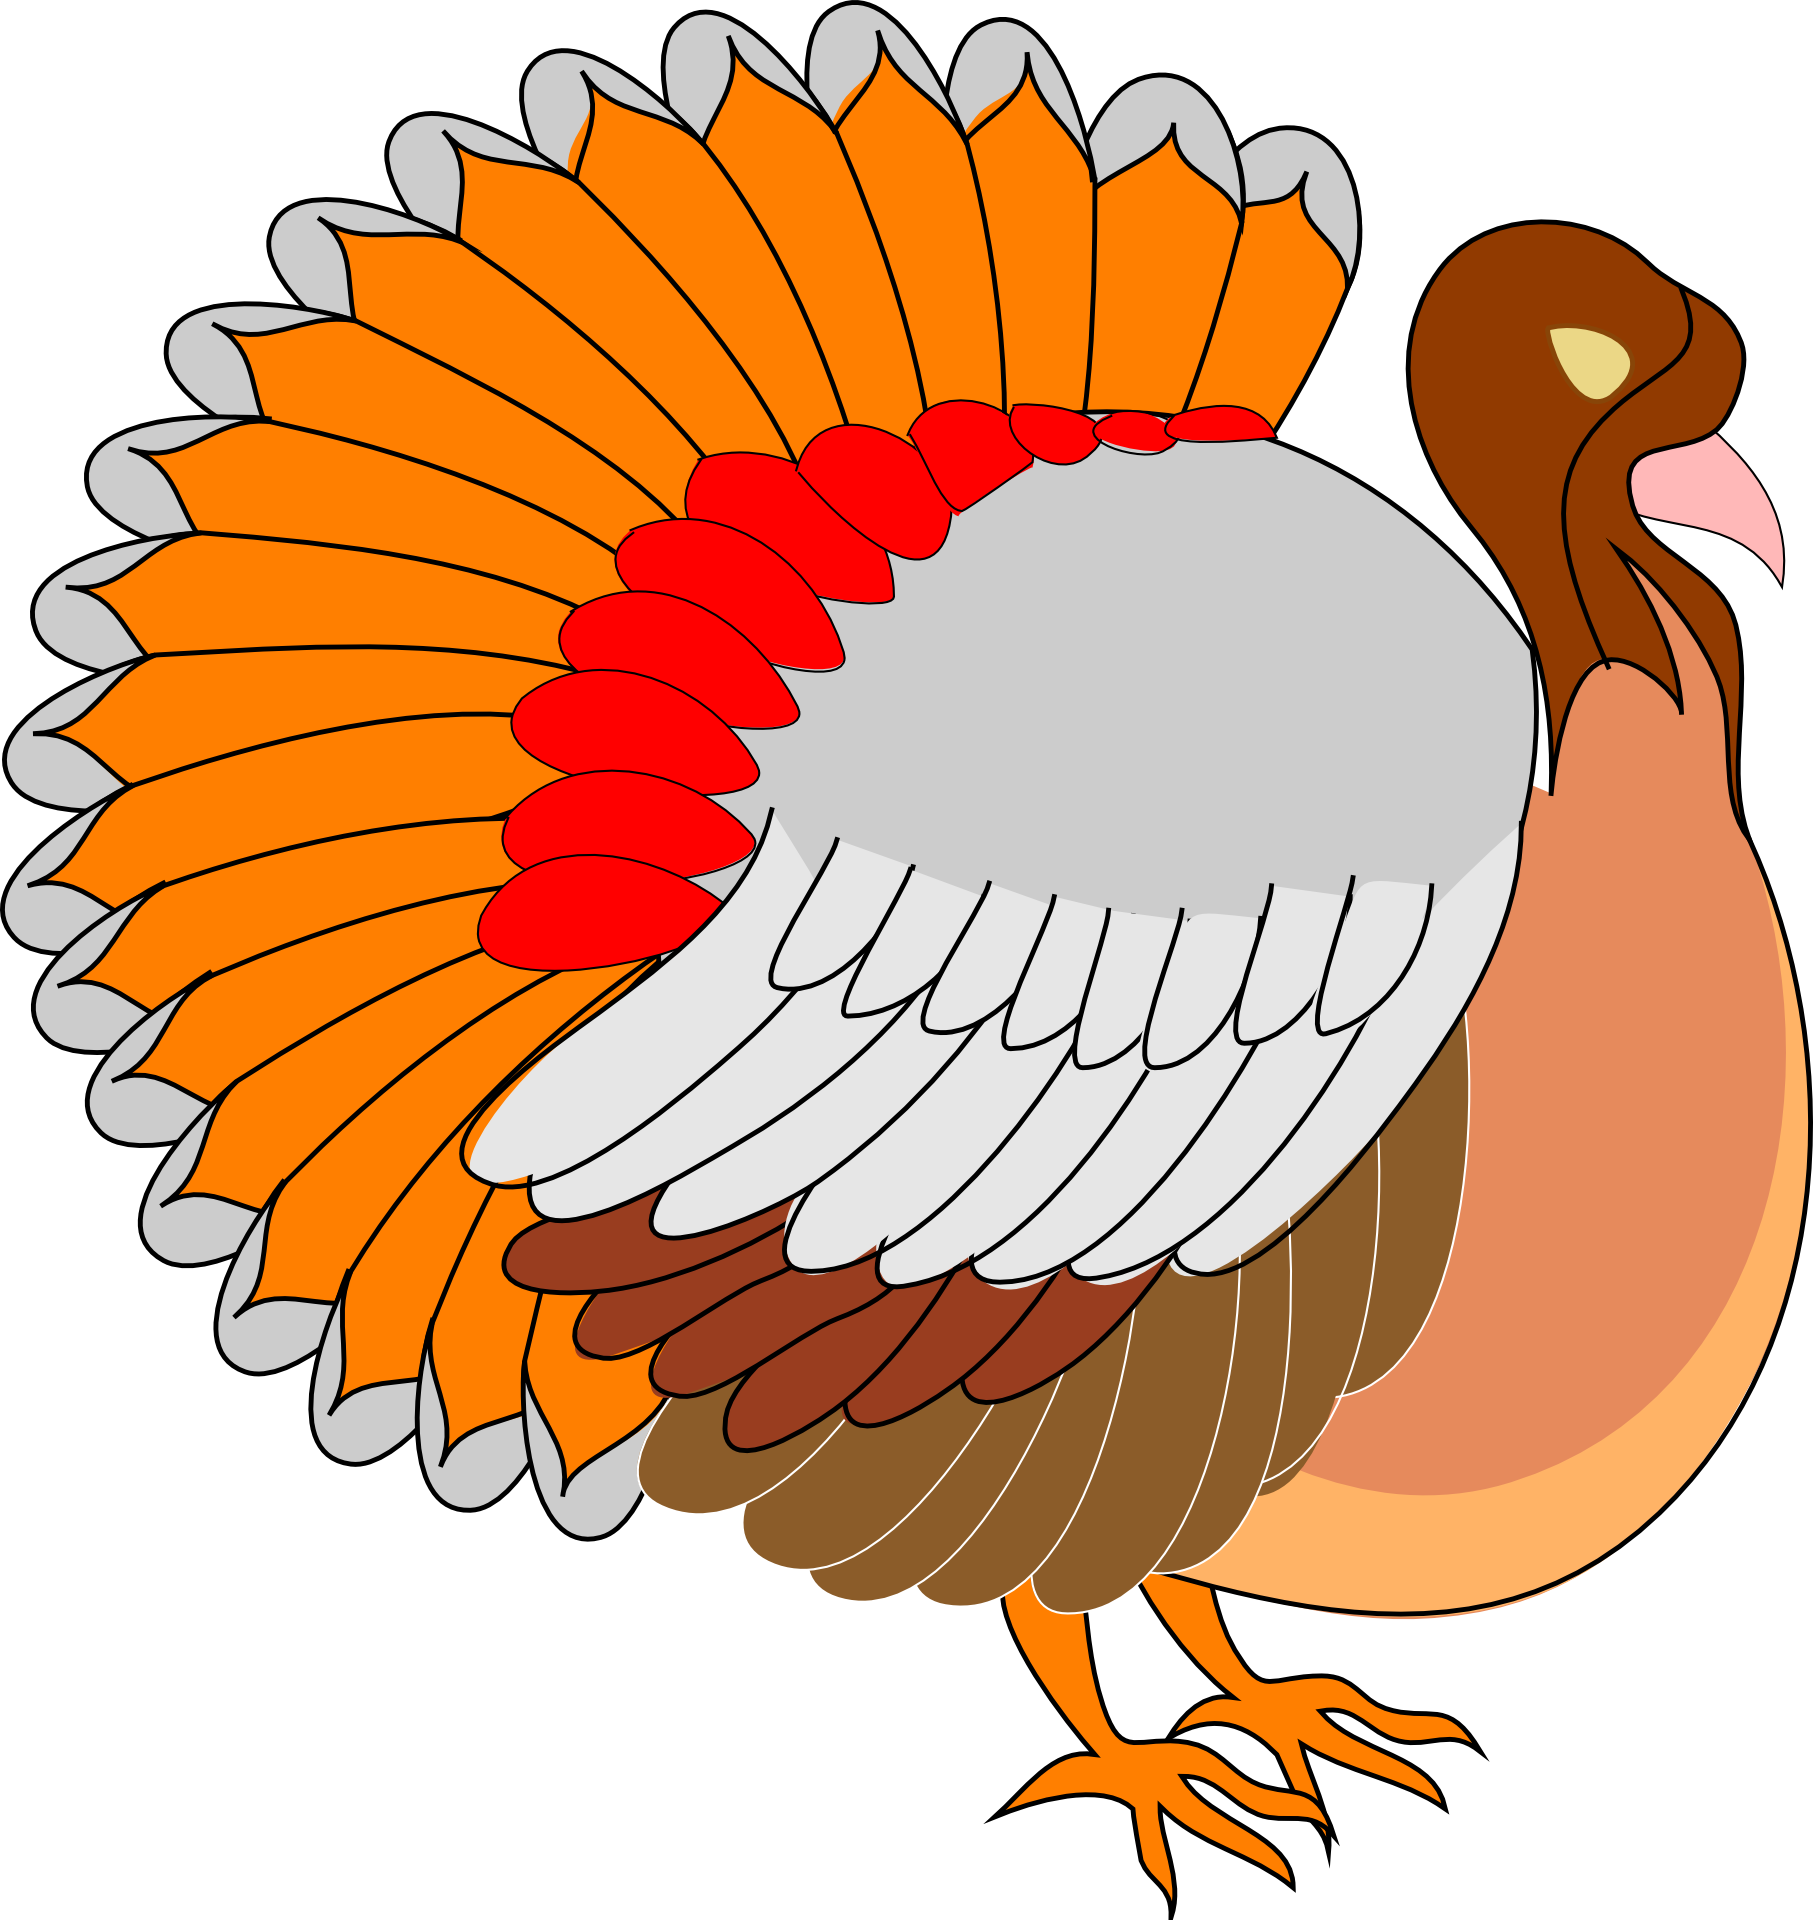 Clipart,picture of turkey bird for thanksgiving free image.